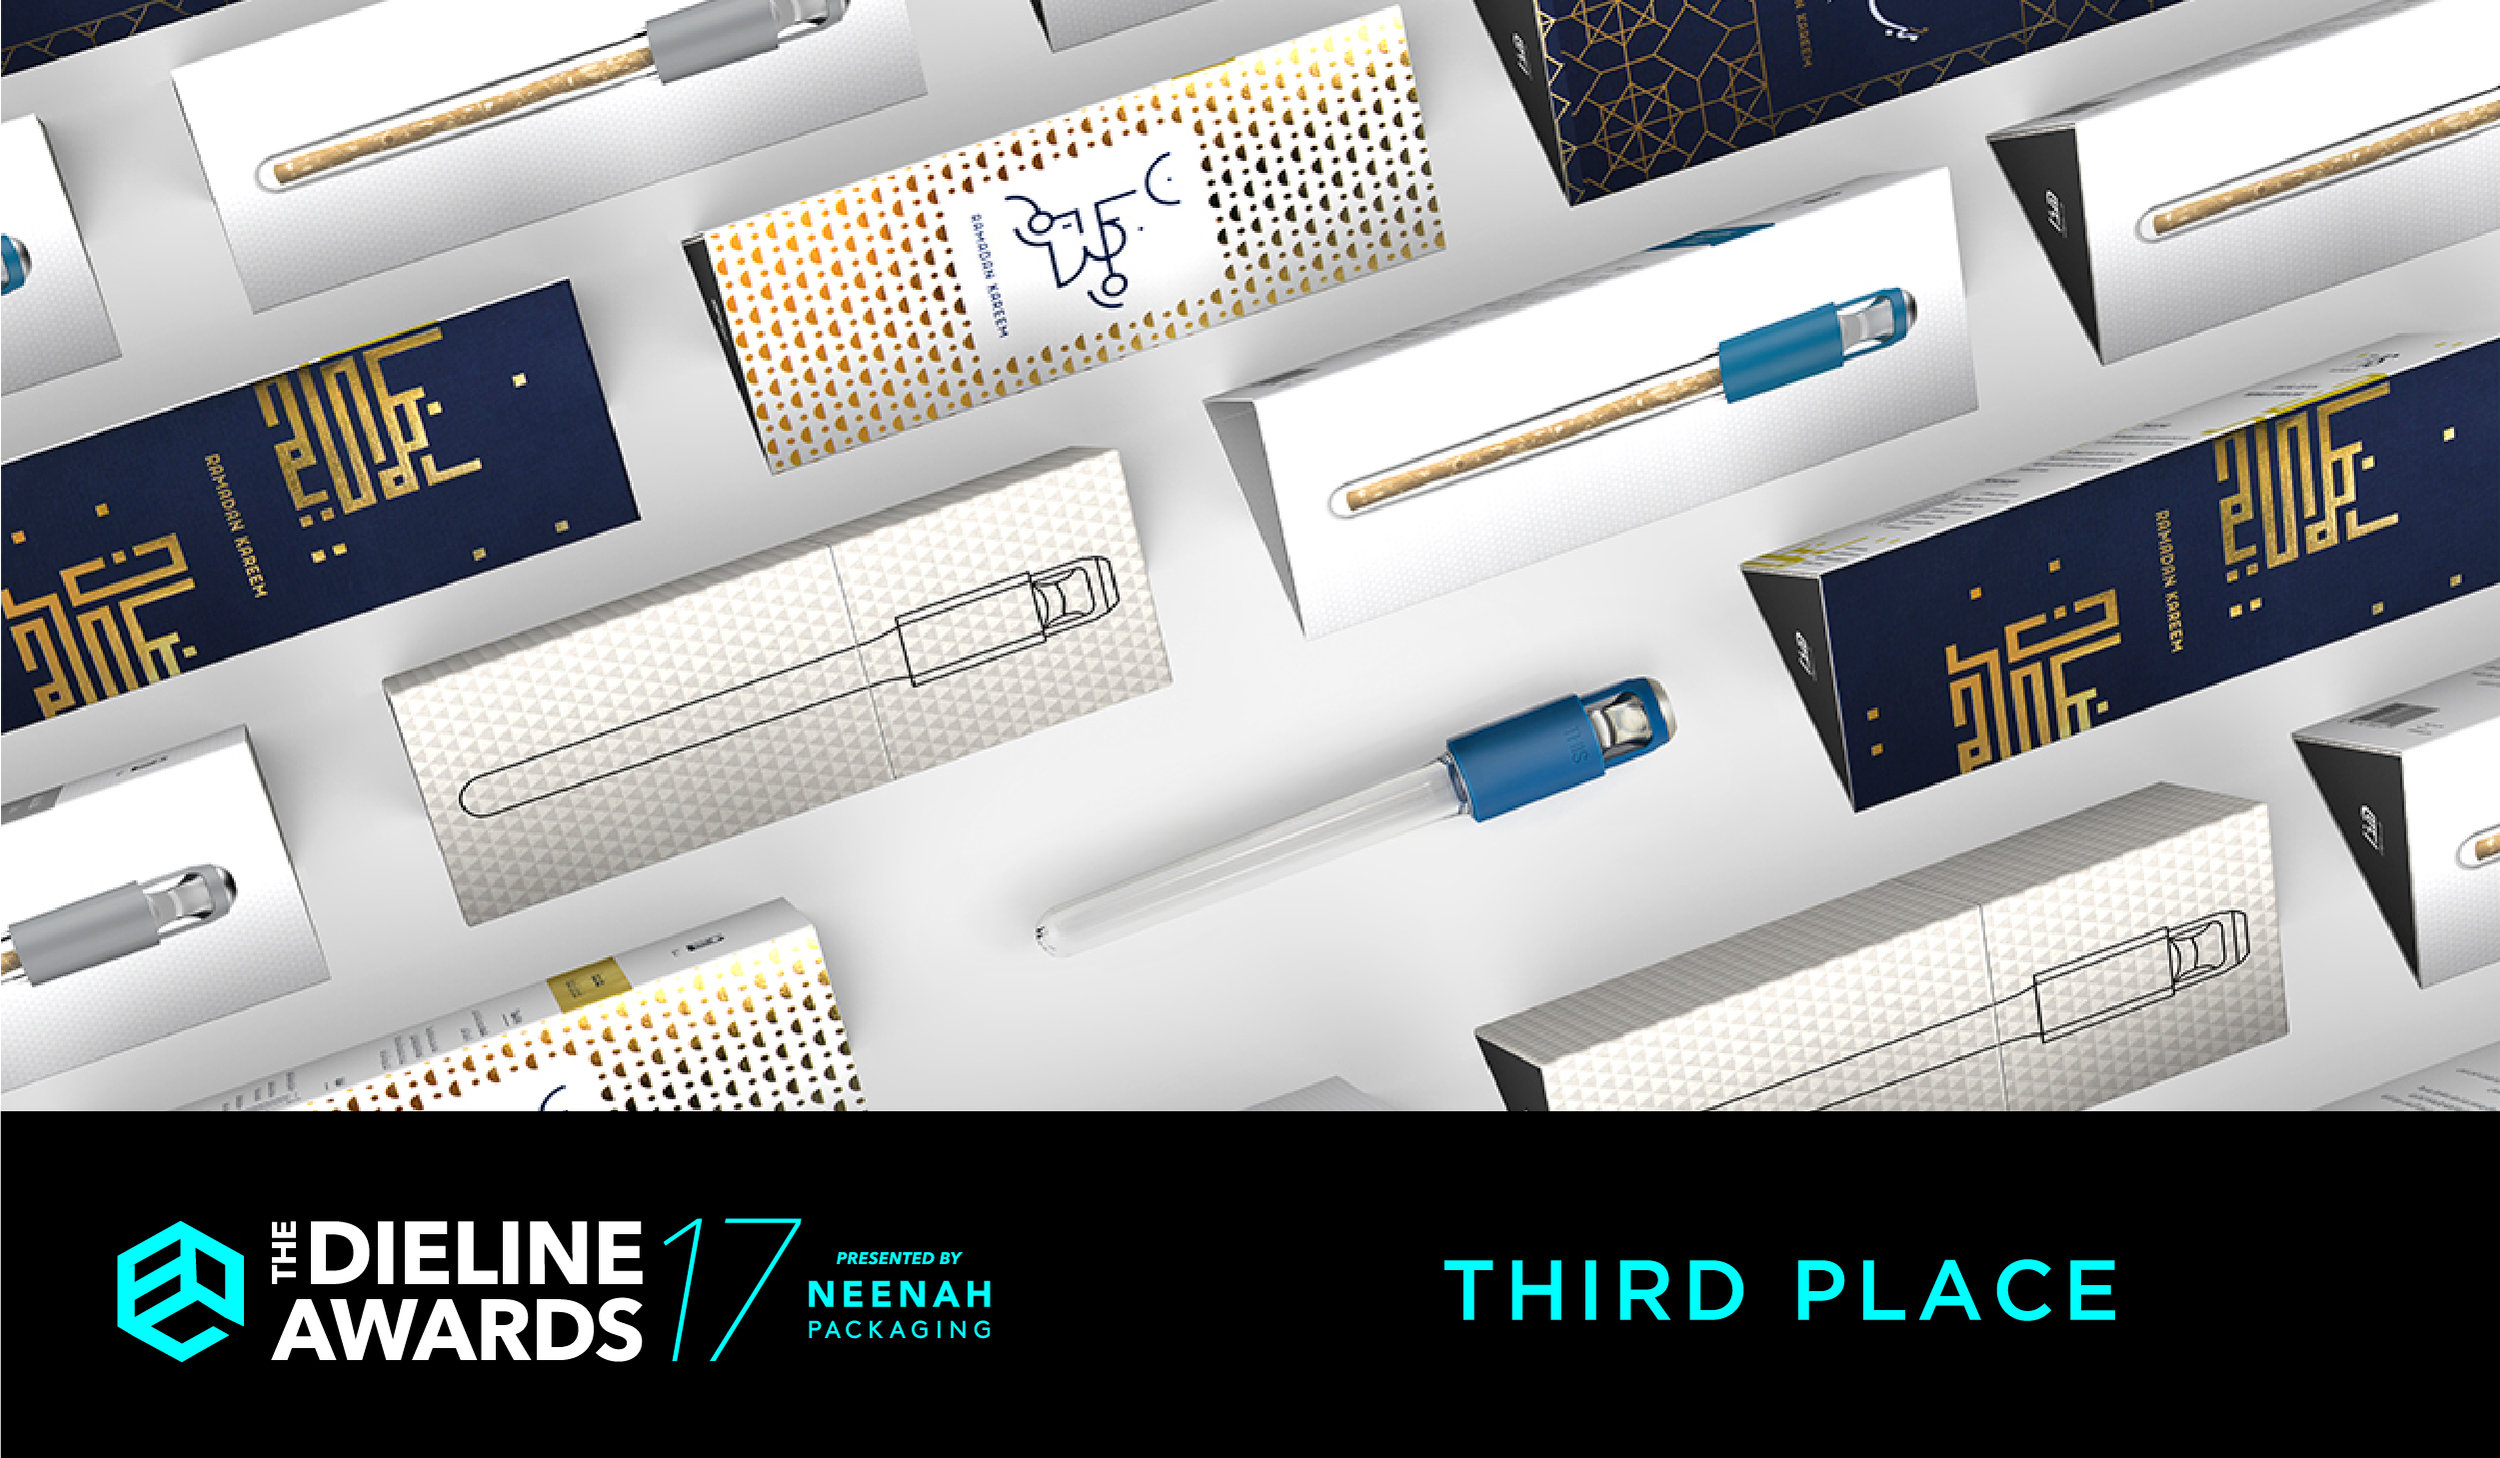 The Dieline Awards 2017: THIS Toothbrush – The Cutter Case